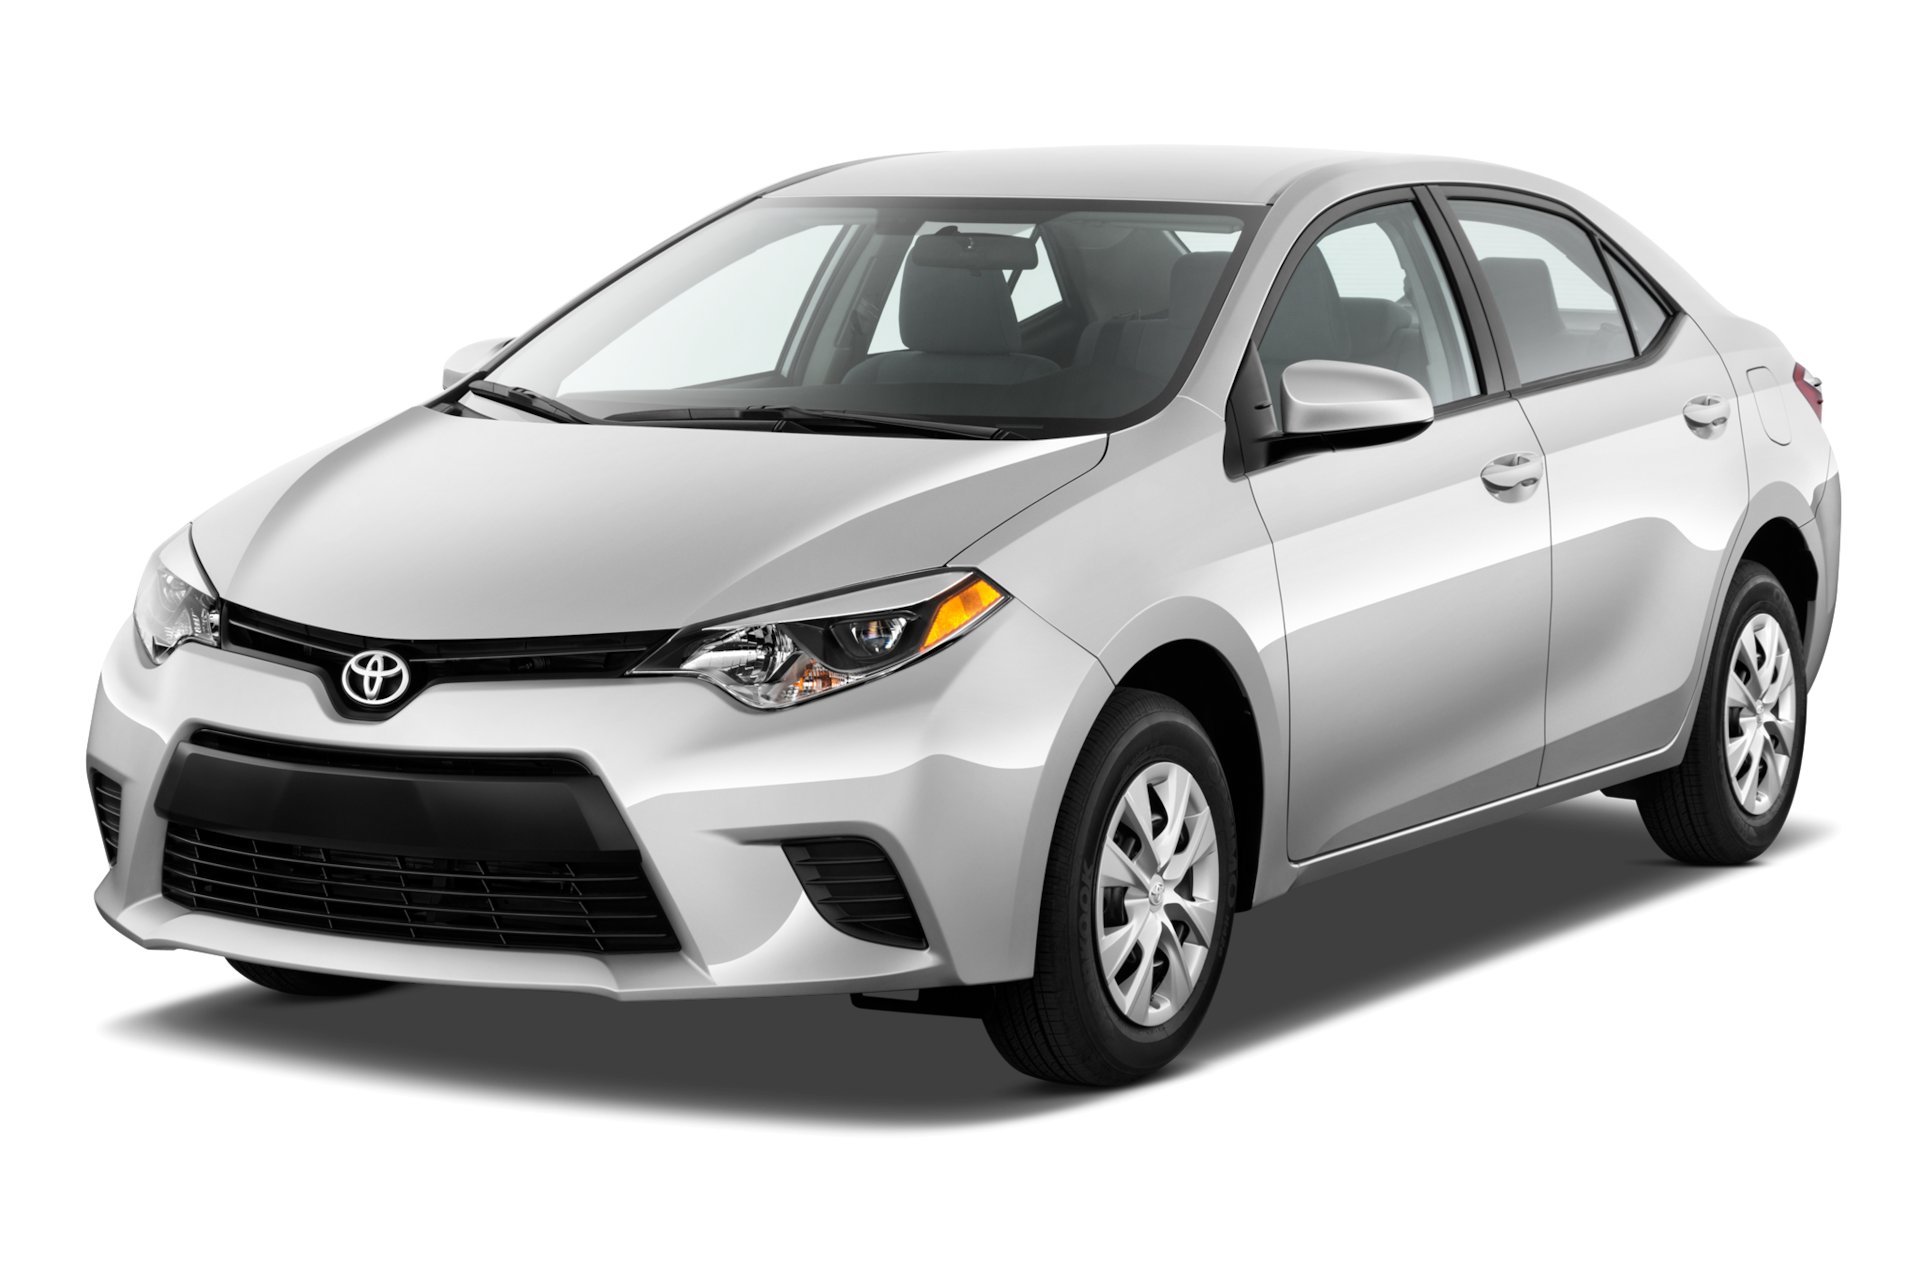 2014 Toyota Corolla Prices, Reviews, and Photos - MotorTrend